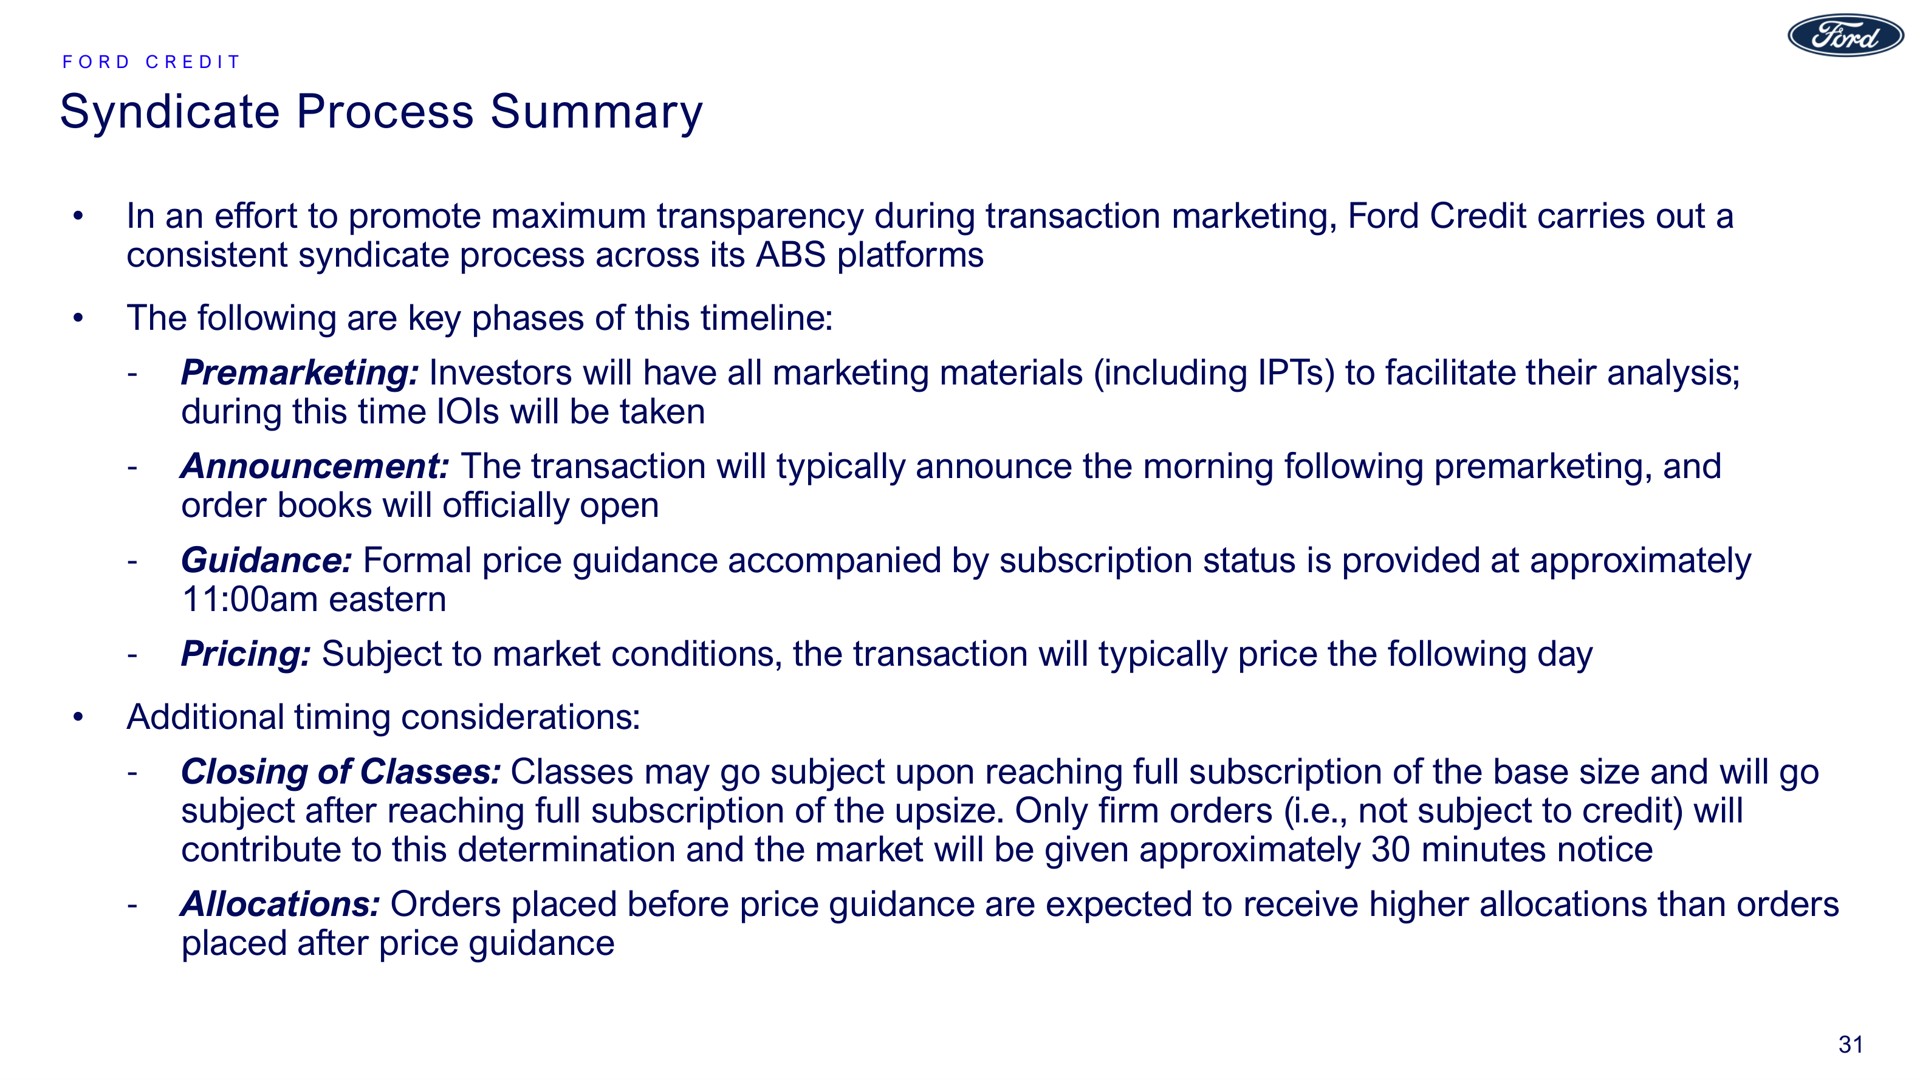 syndicate process summary in an effort to promote maximum transparency during transaction marketing ford credit carries out a consistent syndicate process across its platforms the following are key phases of this investors will have all marketing materials including to facilitate their analysis during this time will be taken announcement the transaction will typically announce the morning following and order books will officially open guidance formal price guidance accompanied by subscription status is provided at approximately am eastern pricing subject to market conditions the transaction will typically price the following day additional timing considerations closing of classes classes may go subject upon reaching full subscription of the base size and will go subject after reaching full subscription of the only firm orders i not subject to credit will contribute to this determination and the market will be given approximately minutes notice allocations orders placed before price guidance are expected to receive higher allocations than orders placed after price guidance | Ford